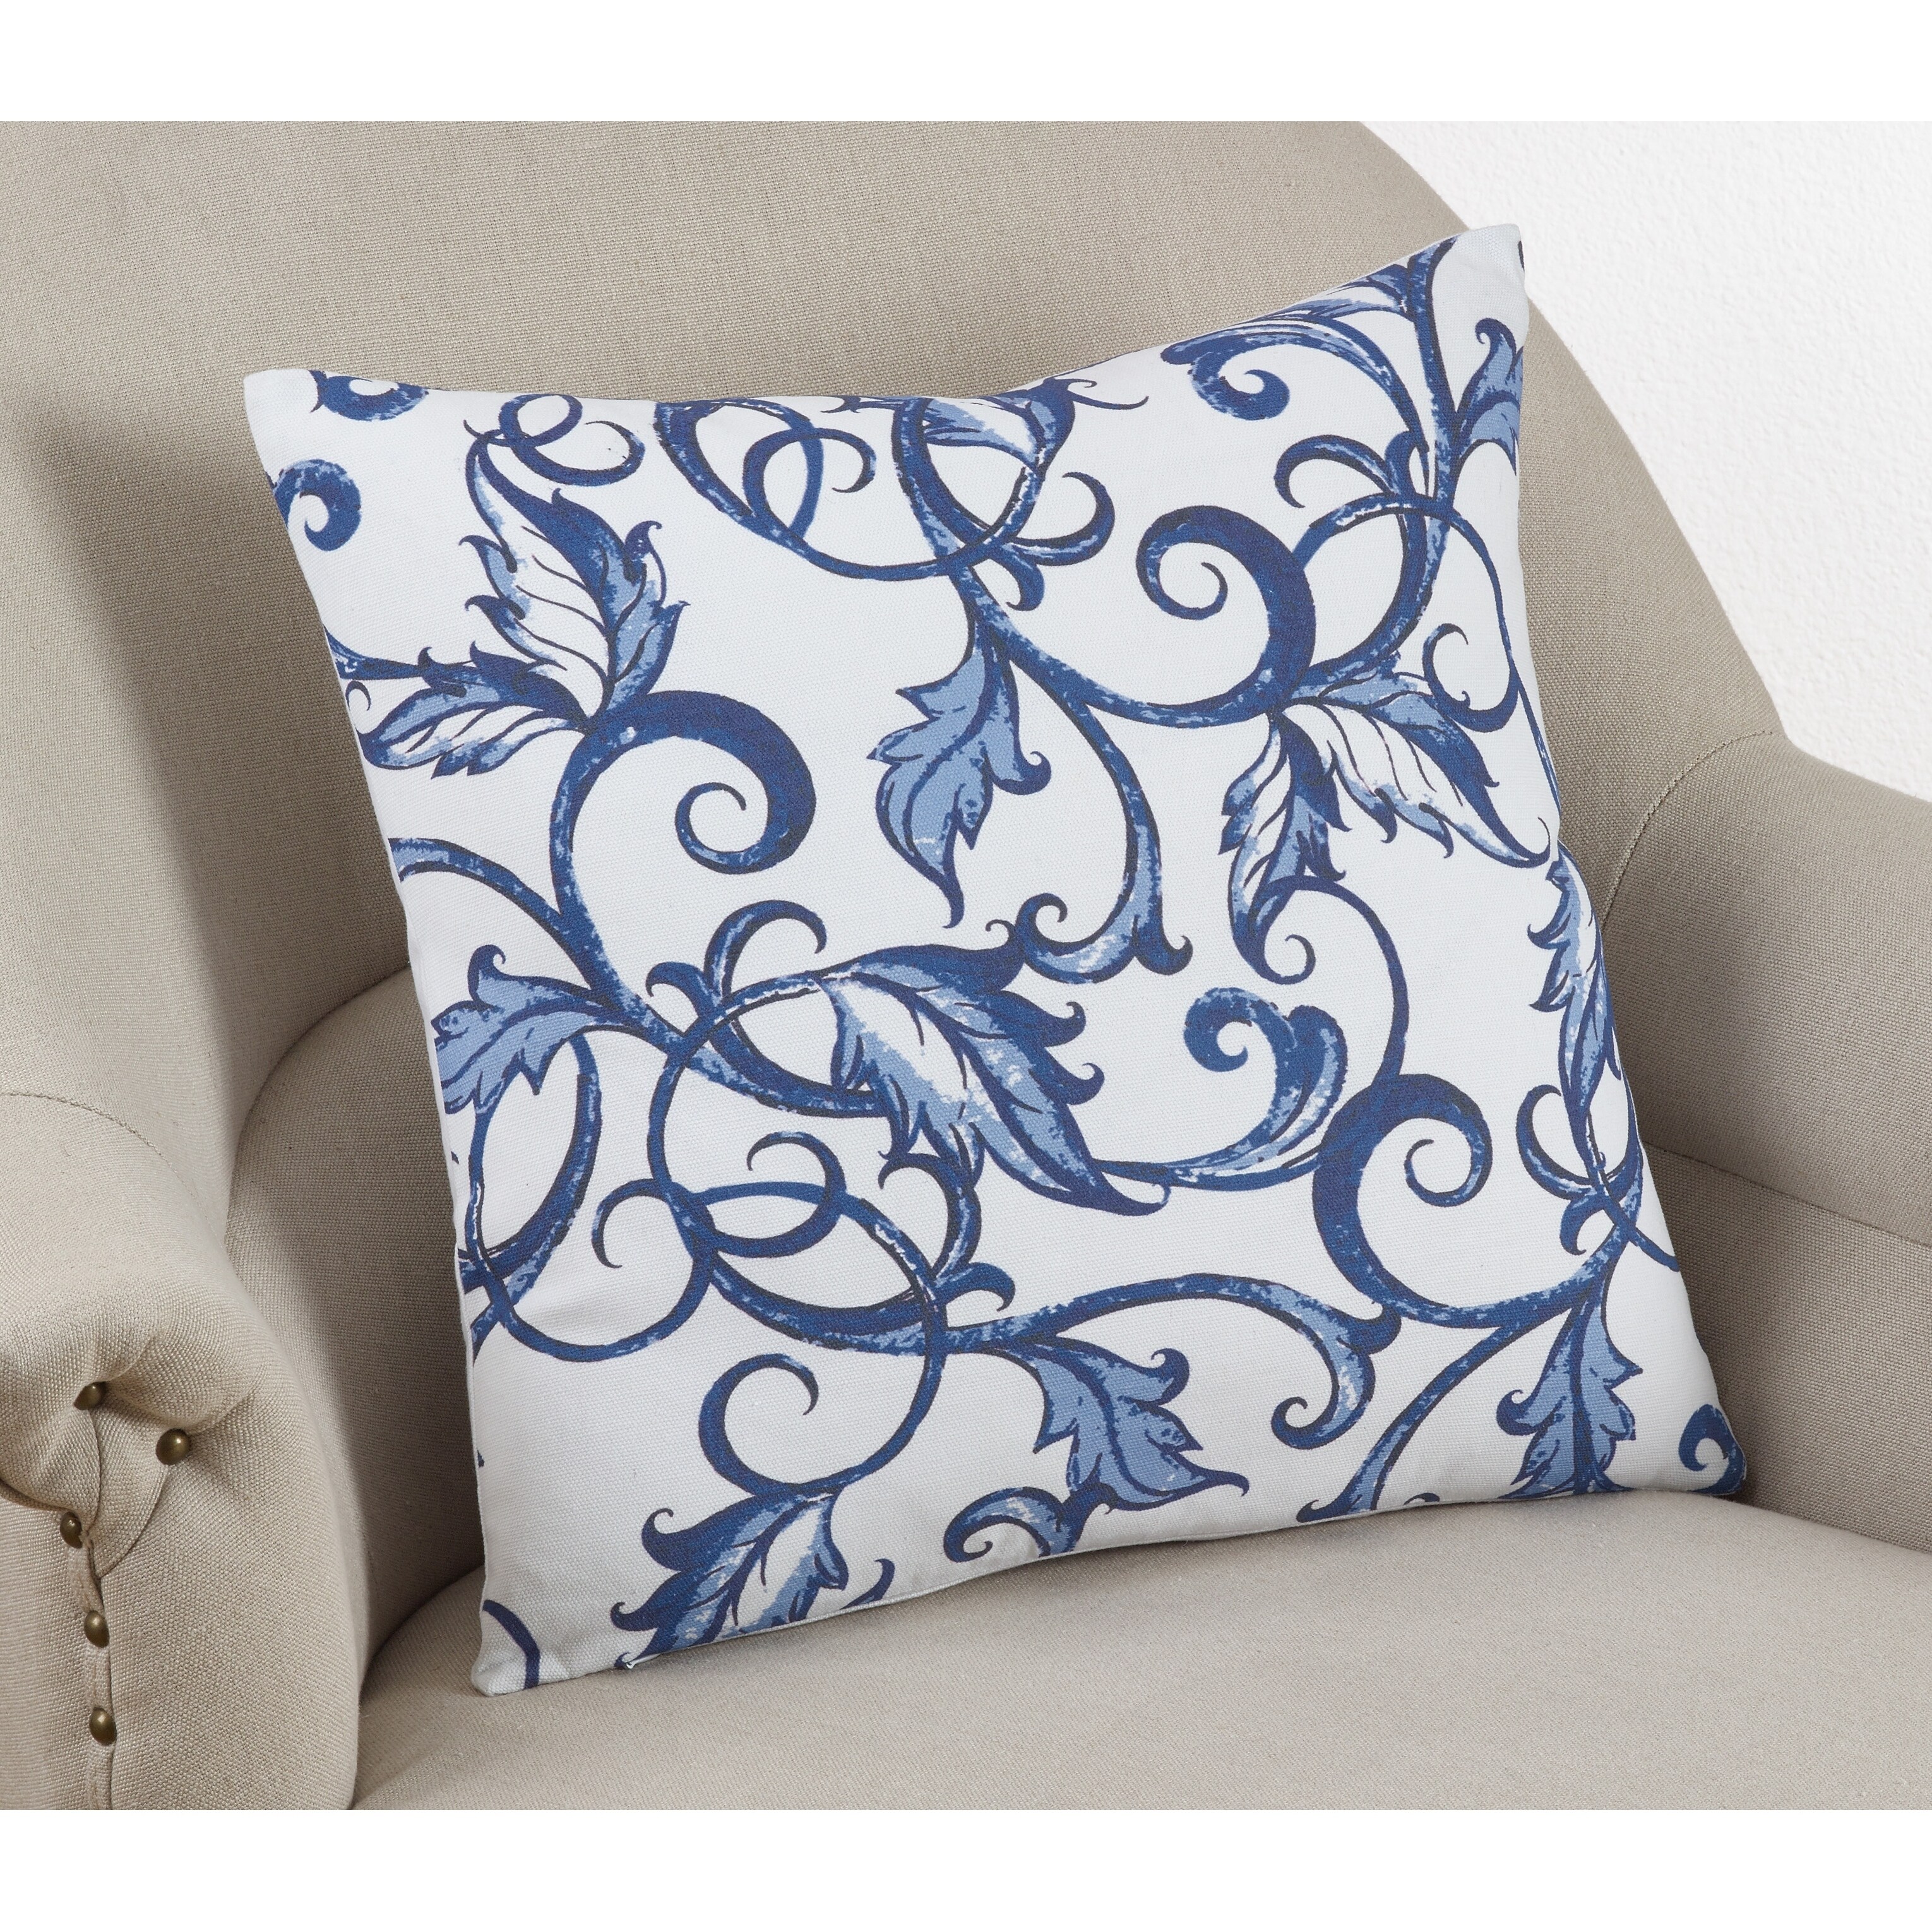 Scrolling Vines Cotton Poly Filled Throw Pillow